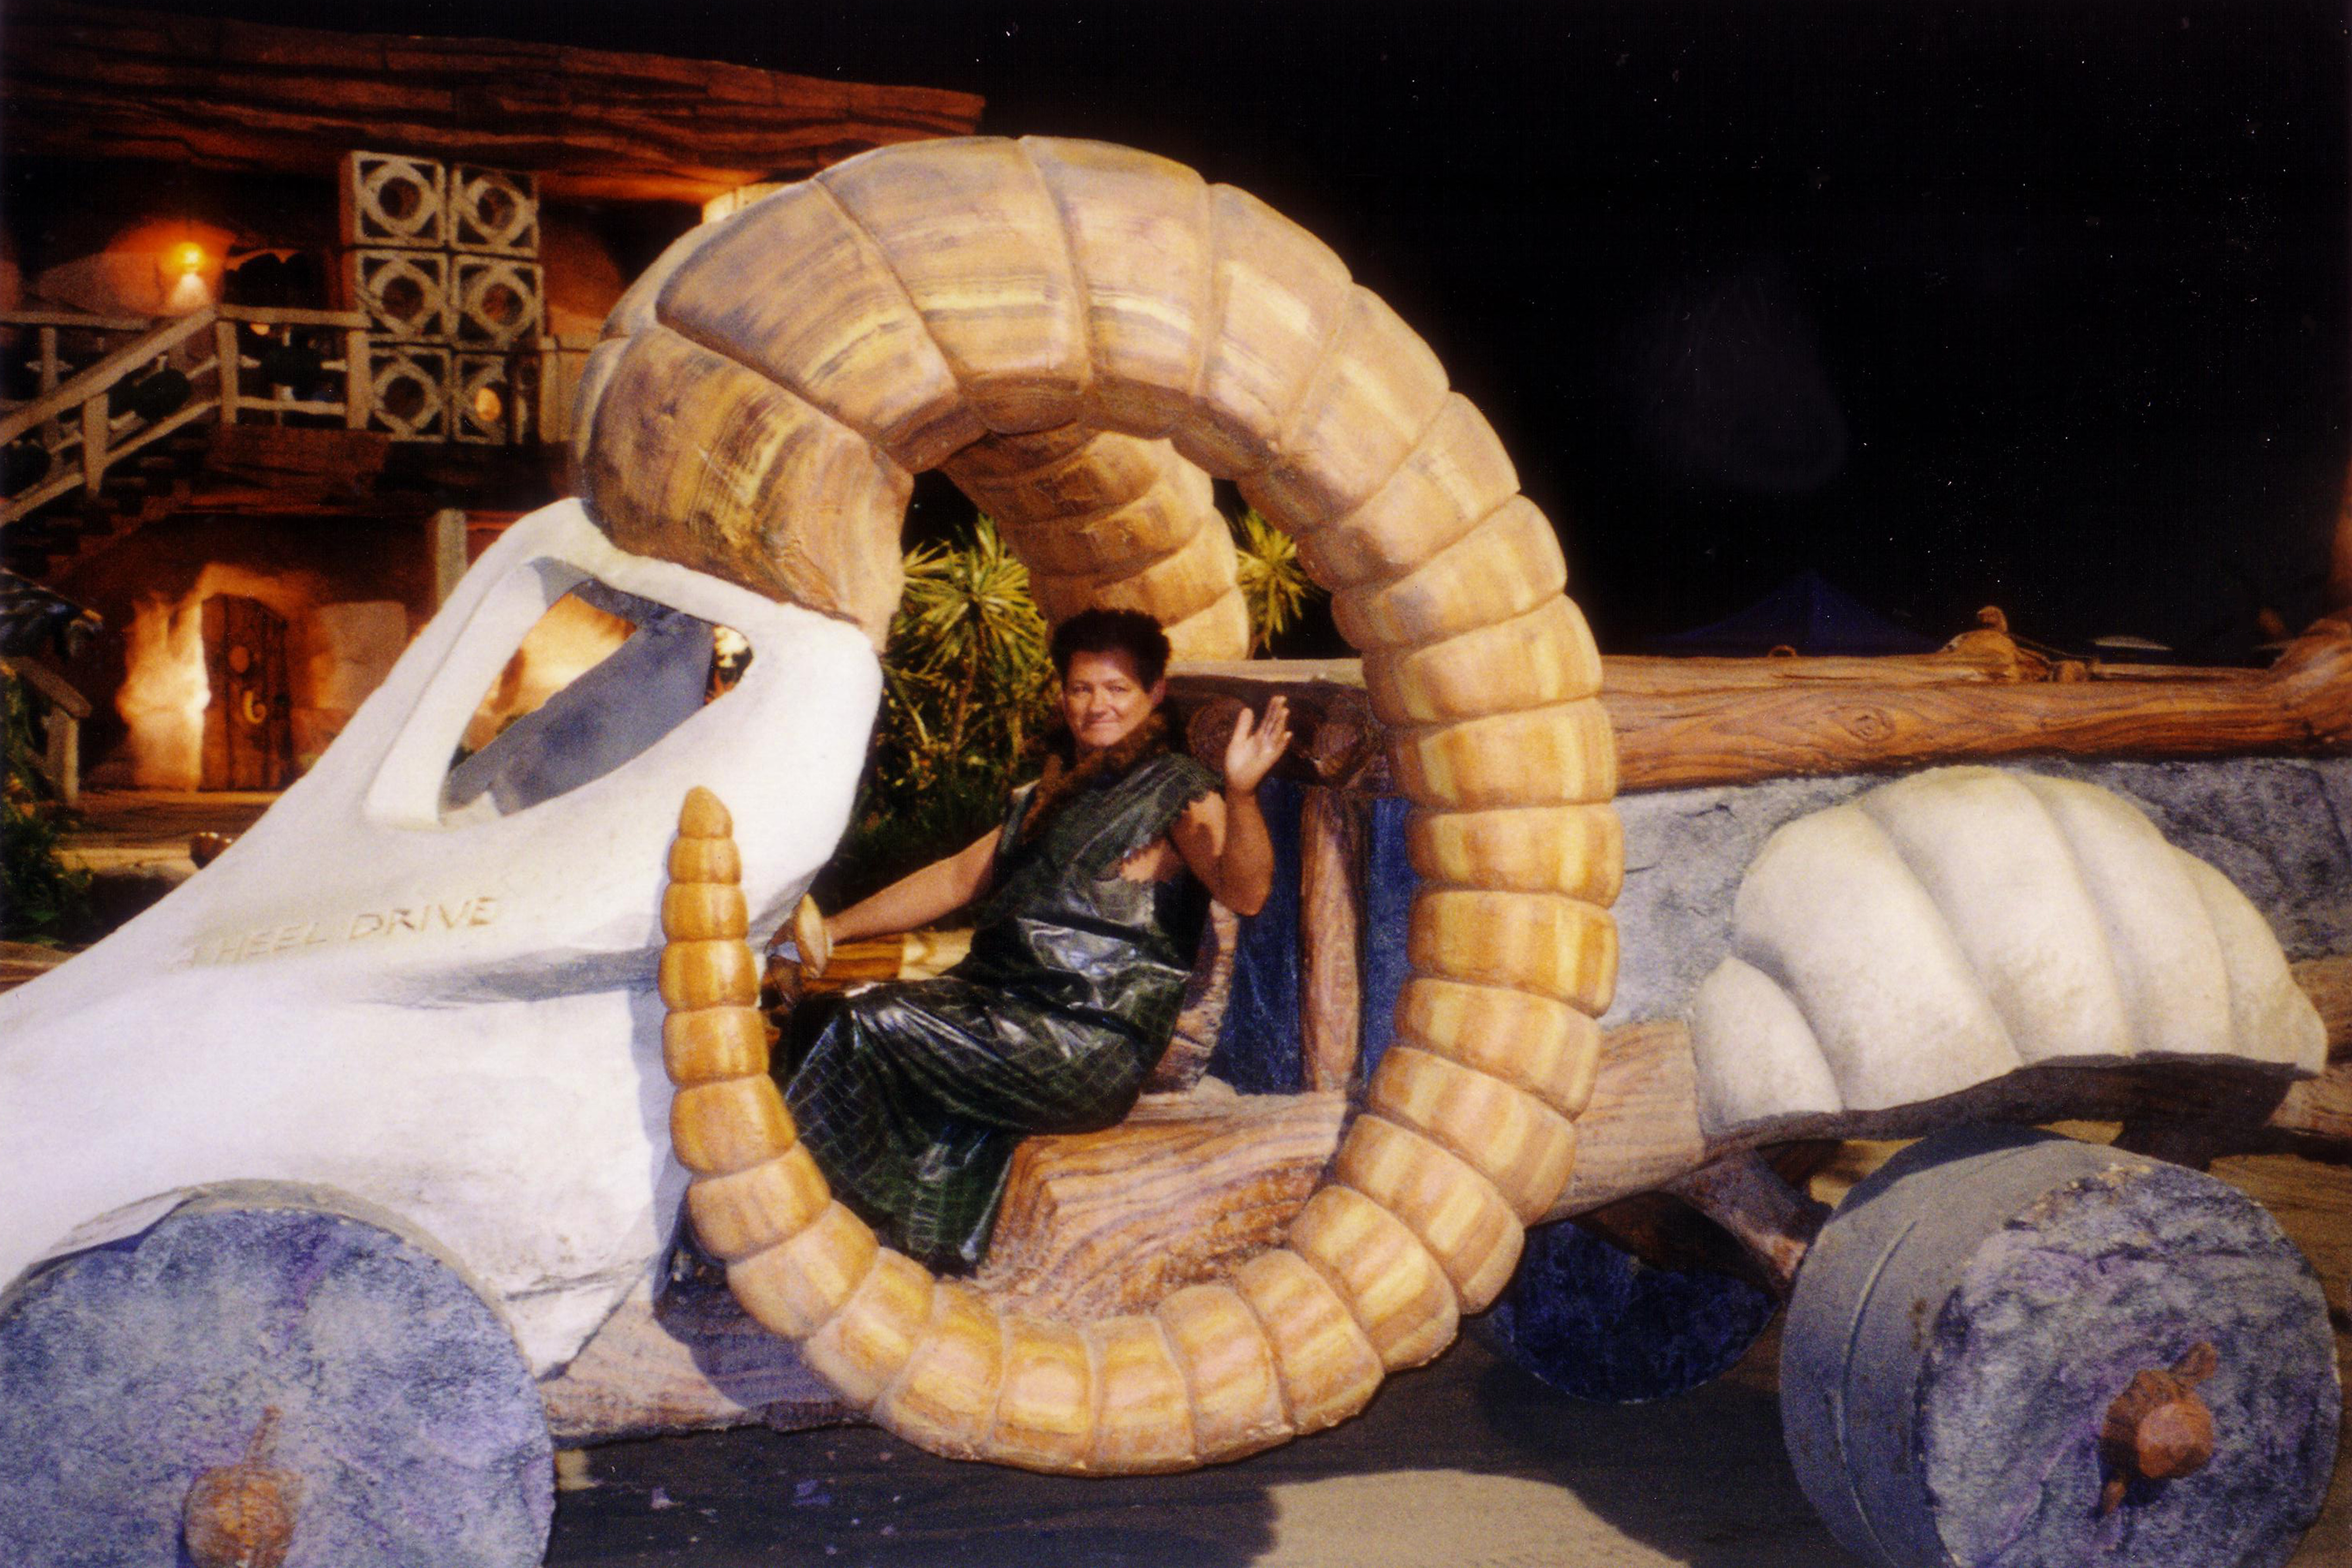 Seth driving the prehistoric 4-wheel drive Dodge Ram pick-up truck as his Bronto King Patron character one starry night at the gravel quarry set location of feature film The Flintstones in Viva Rock Vegas (2000)